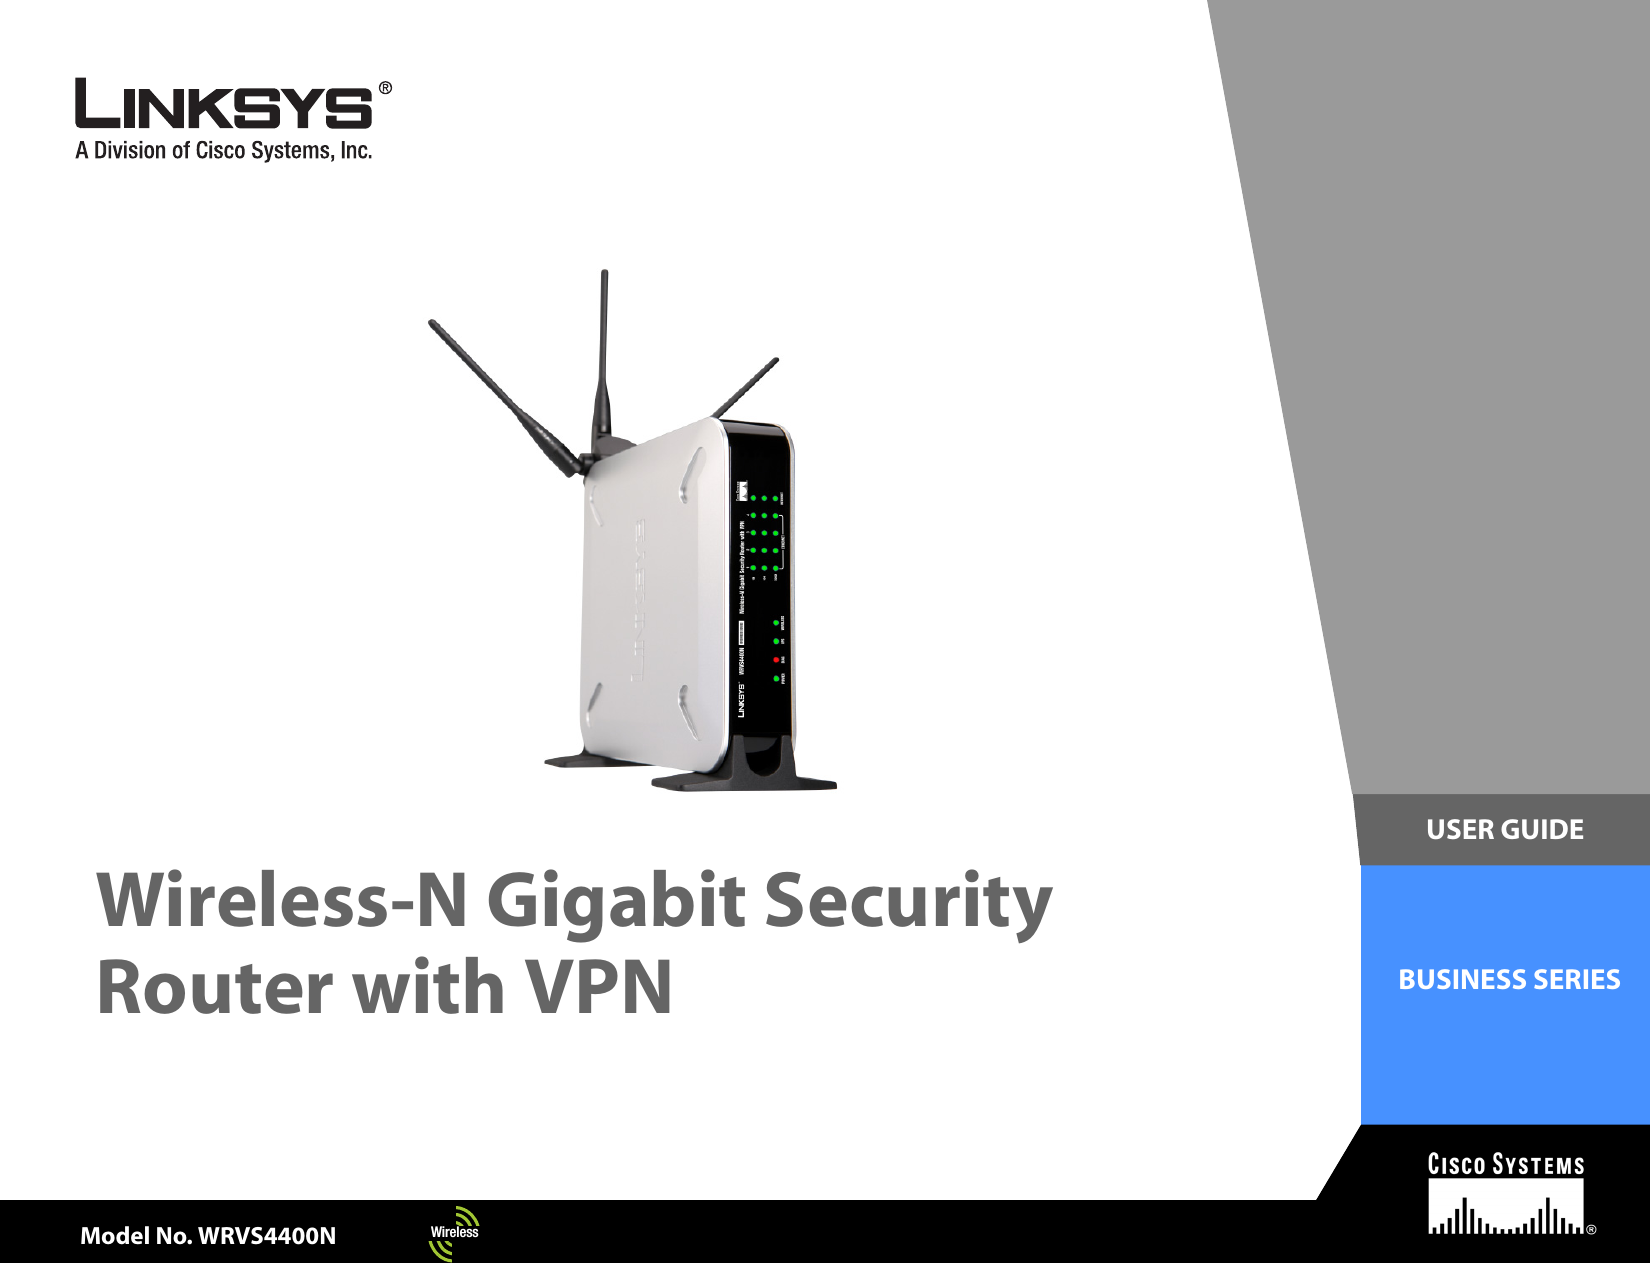 Model No.Model No.USER GUIDEBUSINESS SERIESModel No.Model No.Wireless-N Gigabit Security with PortsModel No. WRVS4400N4-portuterRouter with VPNWireless